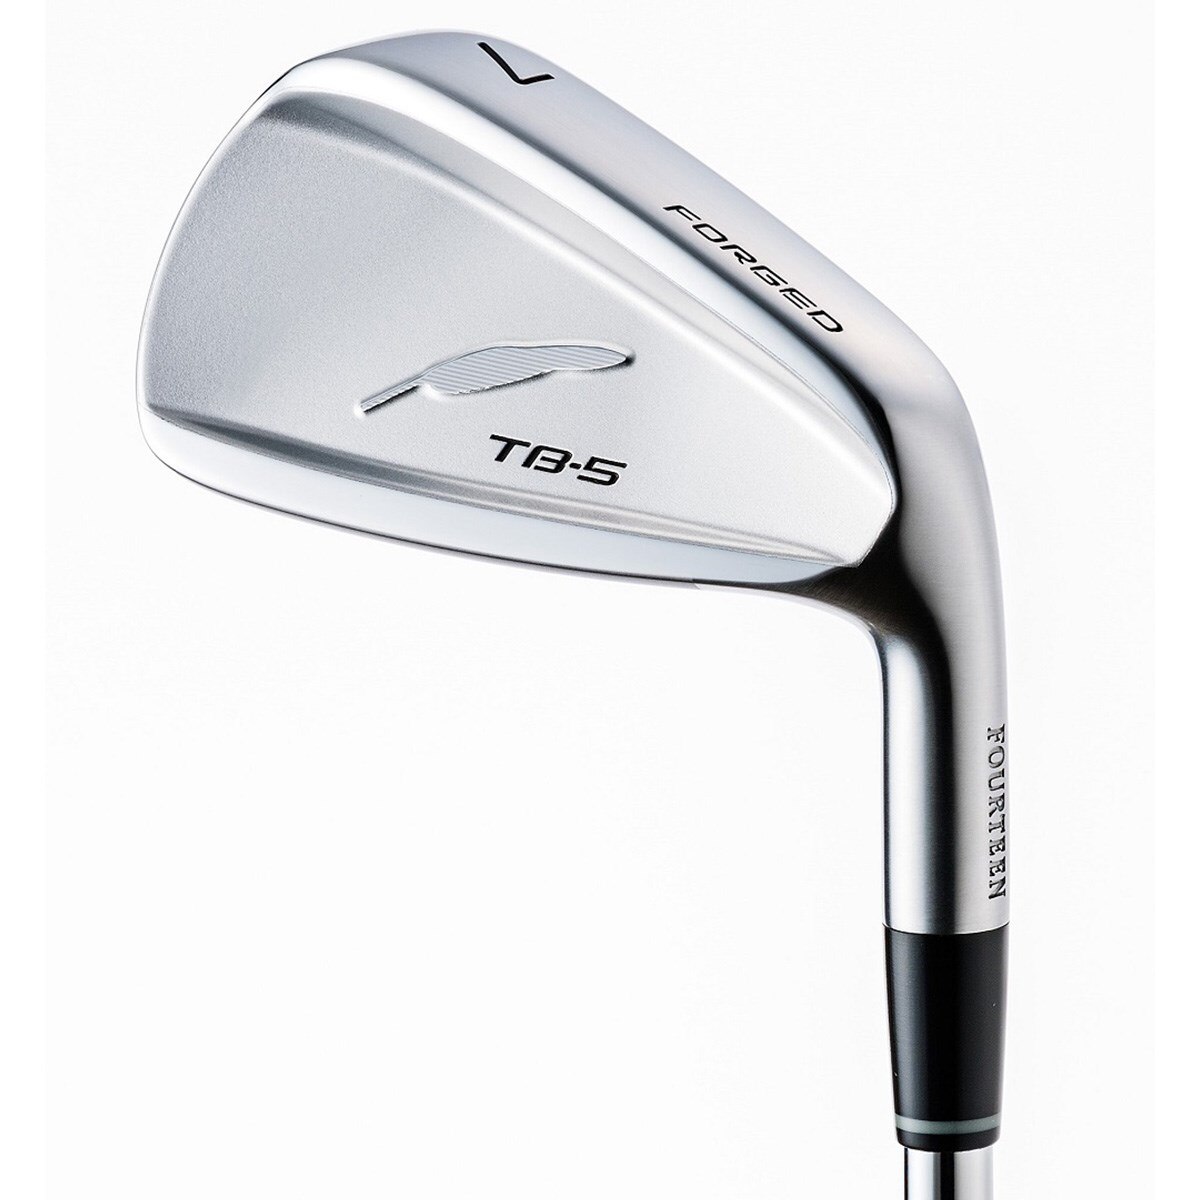 TB-5 FORGED アイアン(5本セット) N.S.PRO MODUS3 TOUR 105 納期:受注後約18週間(アイアンセット)